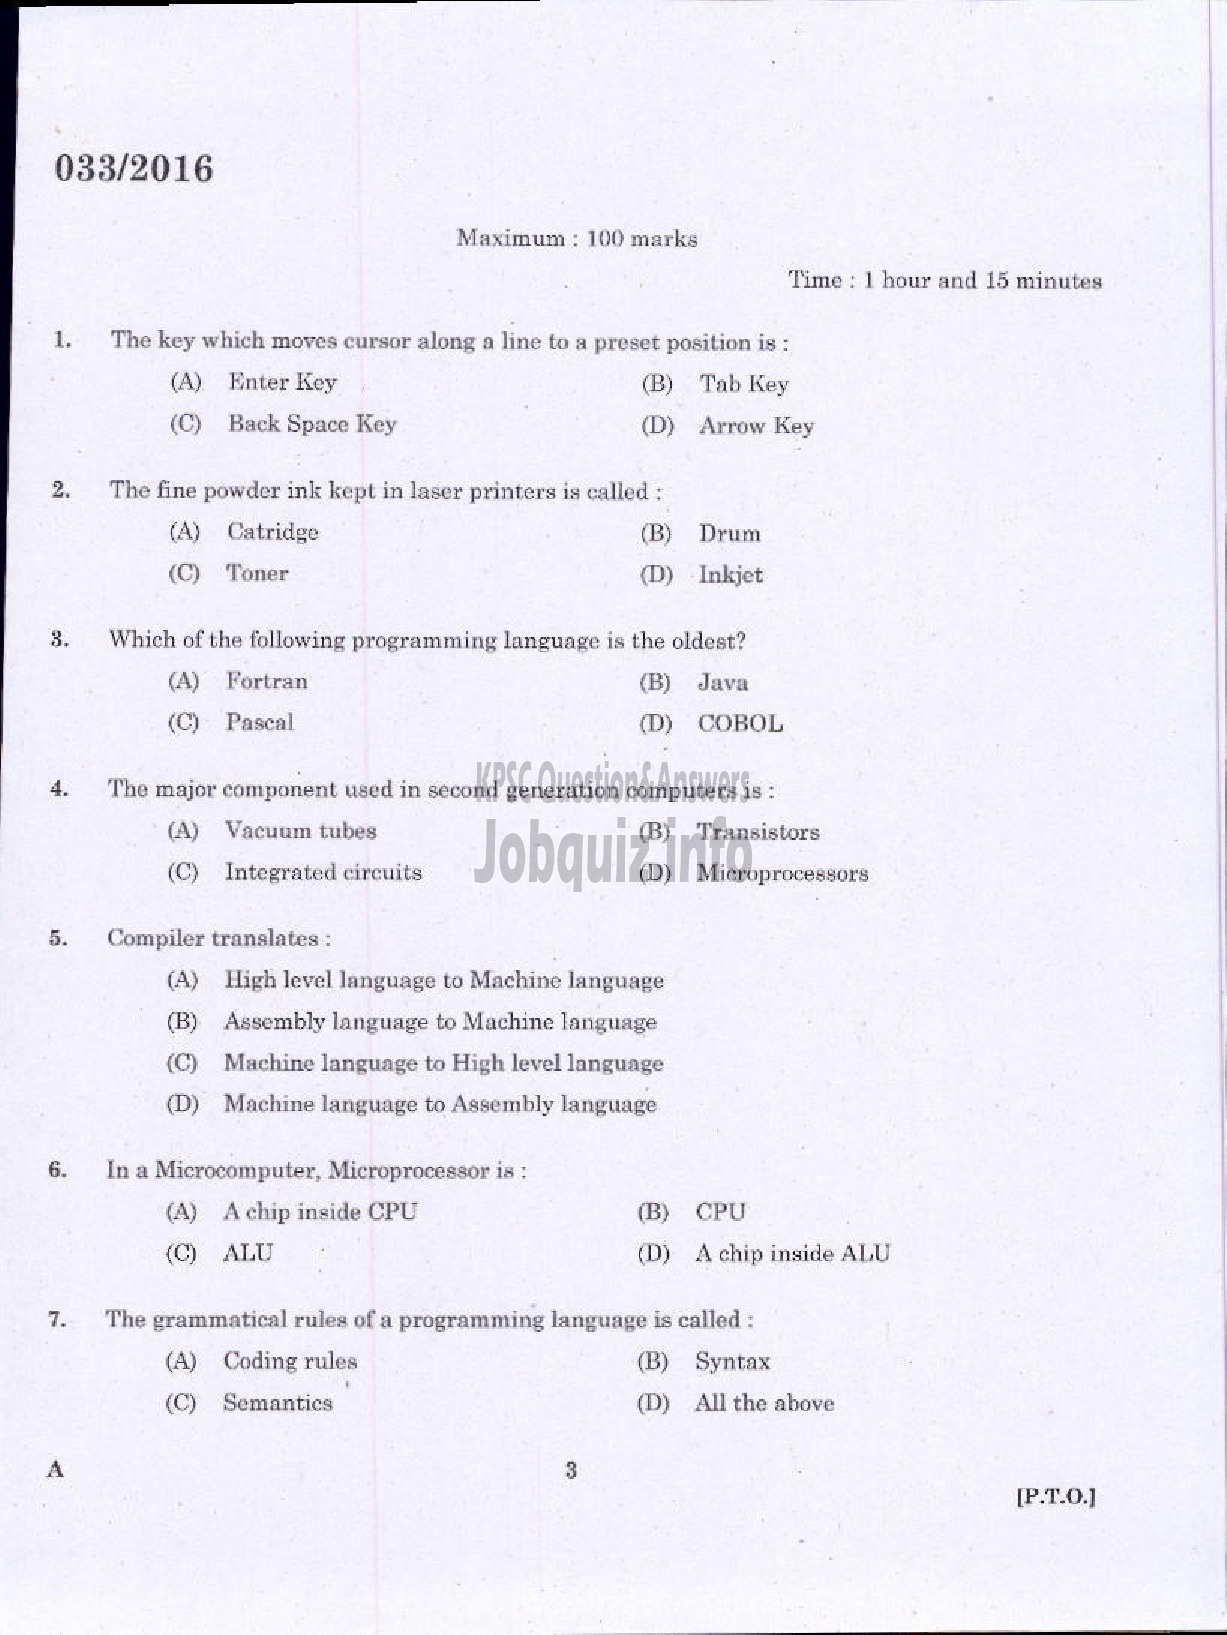 Kerala PSC Question Paper - COMPUTER OPERATOR INFORMATION AND PUBLIC RELATIONS-1